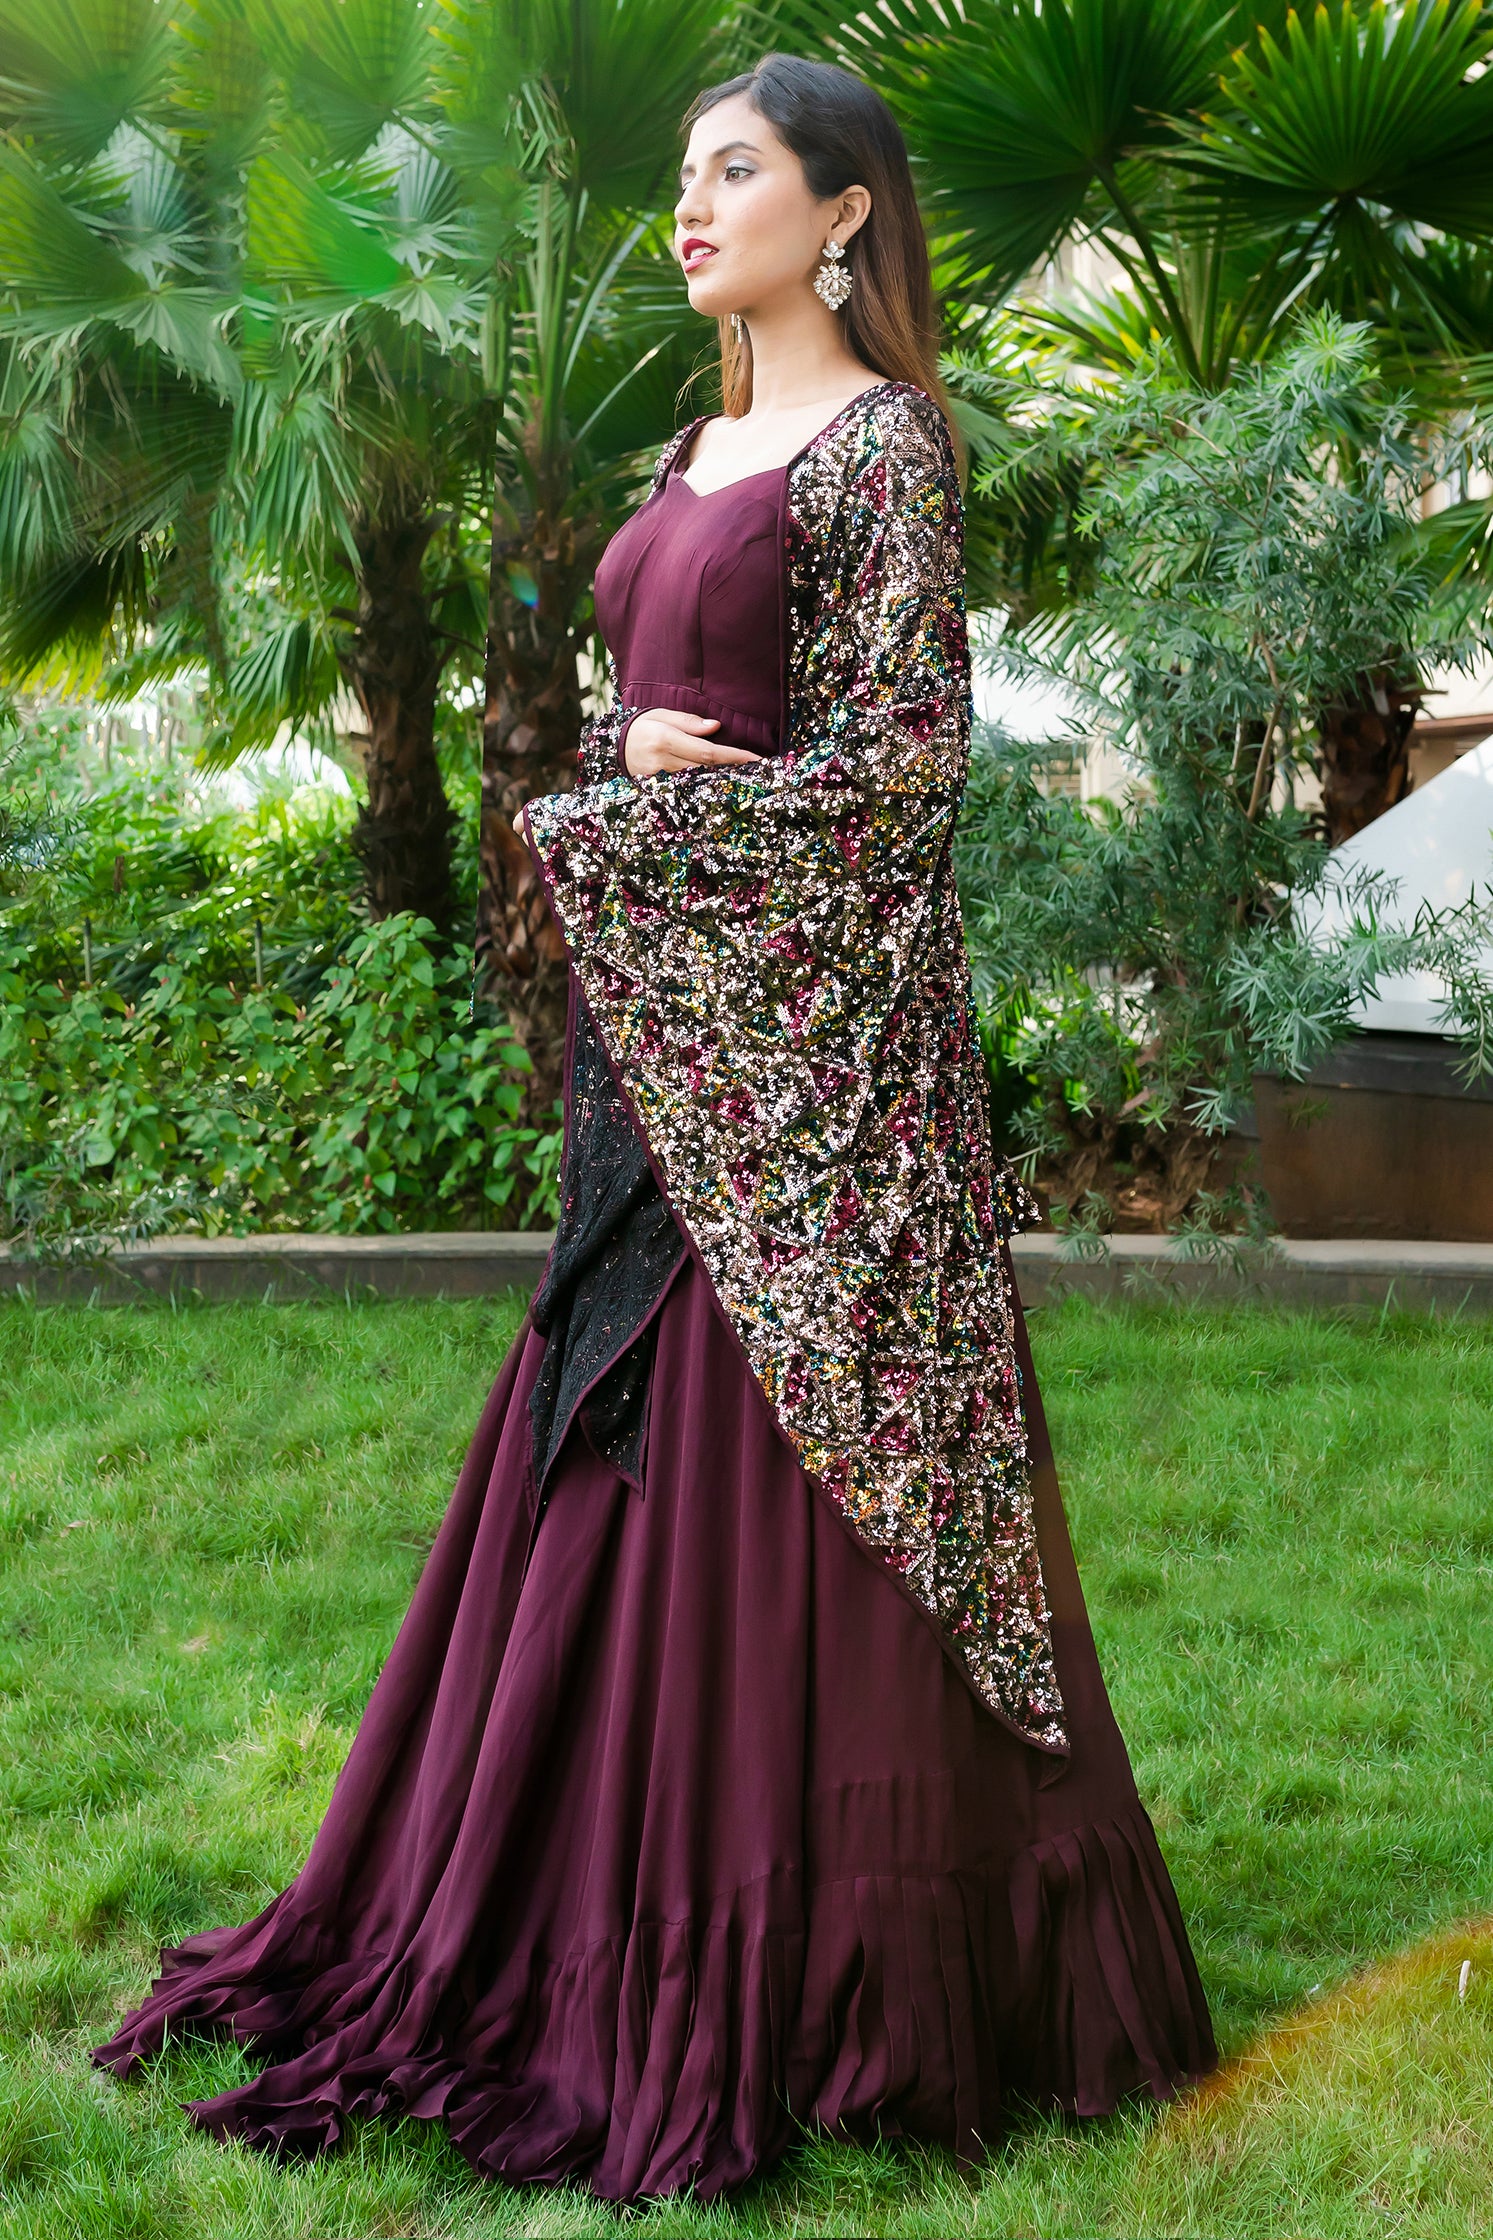 Burgundy Gown with Cape